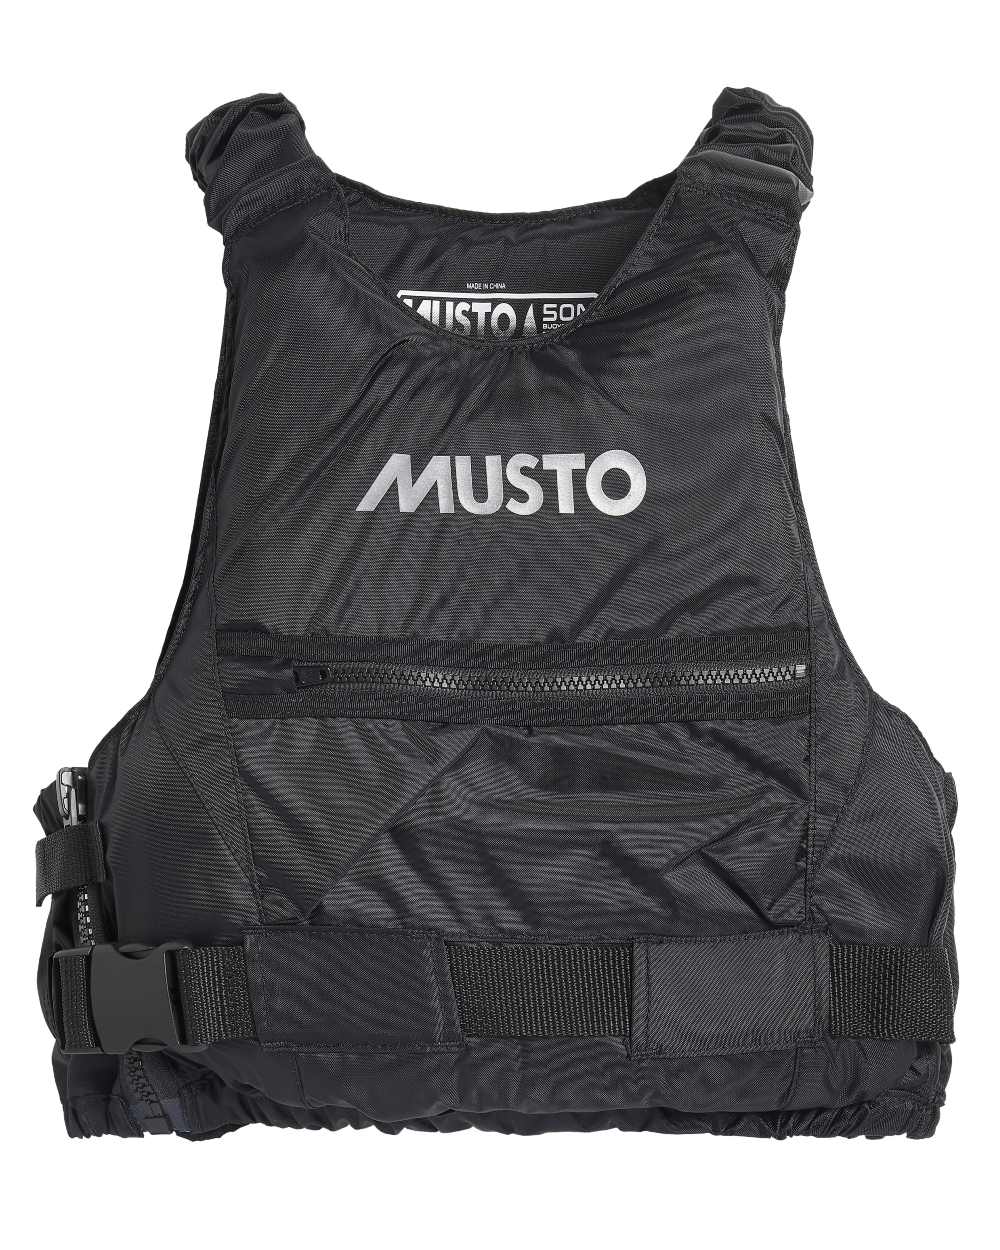 Black Coloured Musto Champ Buoyancy Aid 2.0 On A White Background 